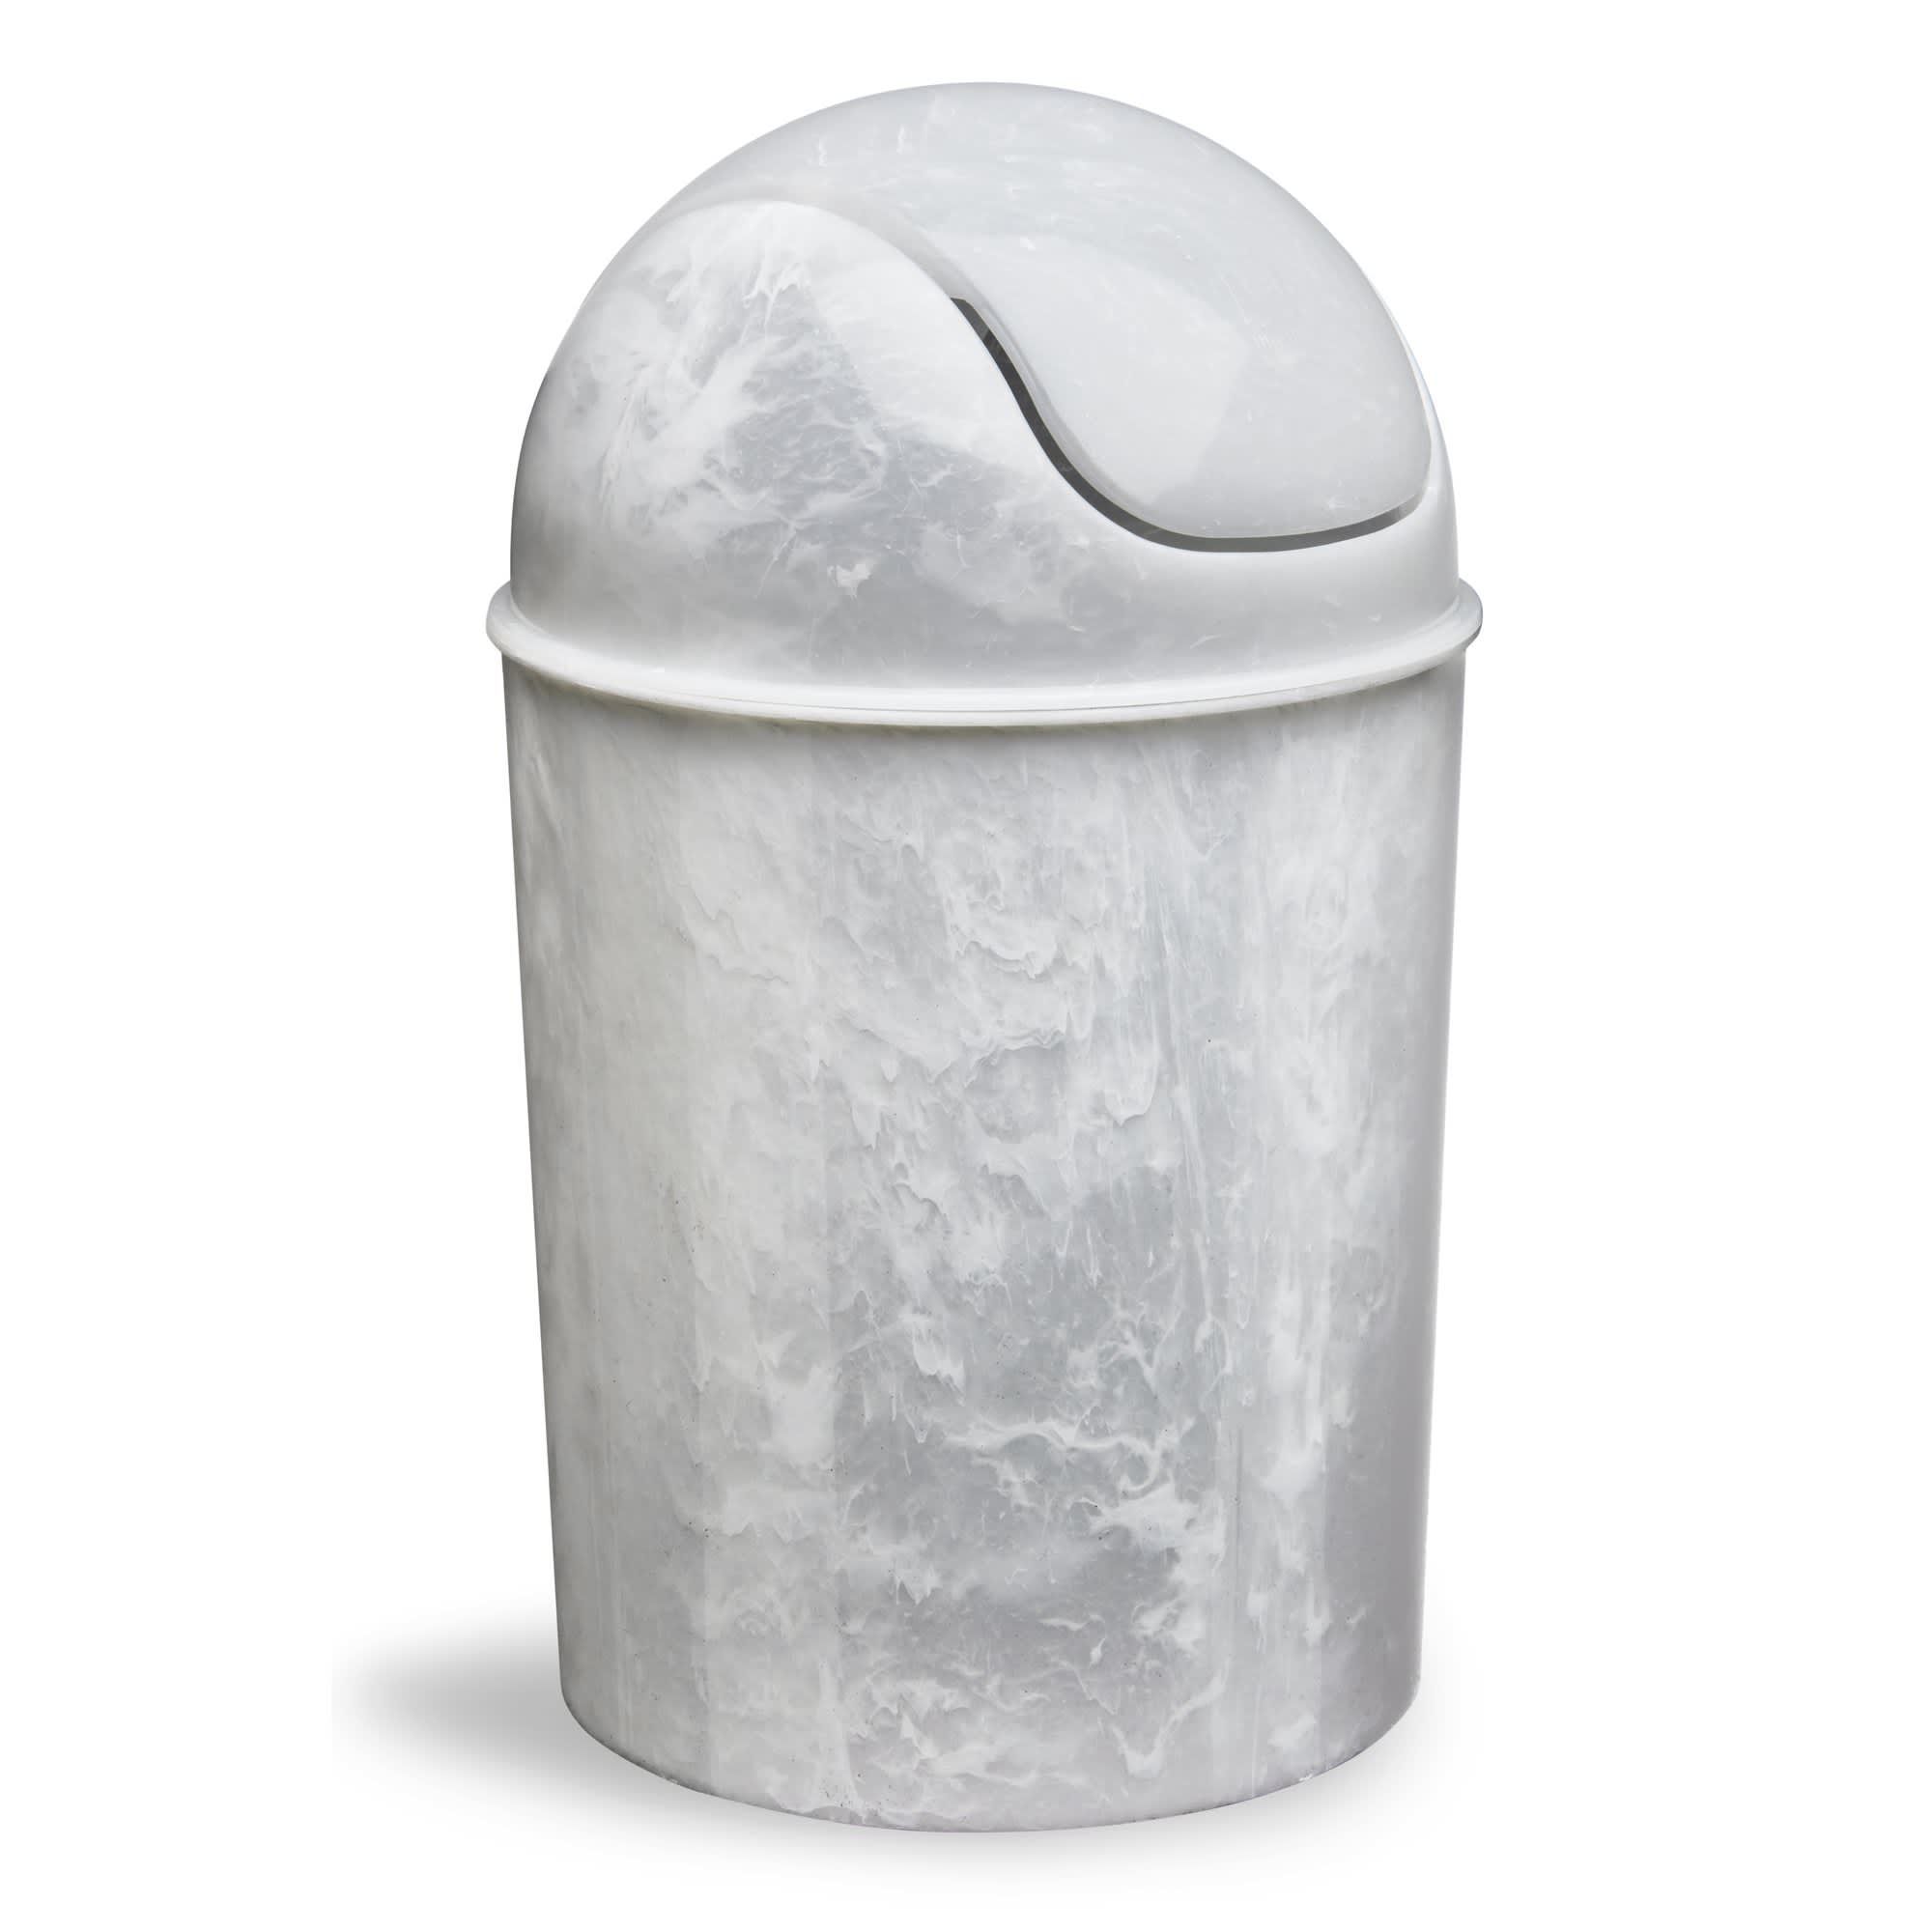 Durable Garbage Can Waste Basket for Bathroom, Umbra Treela Small Trash Can 